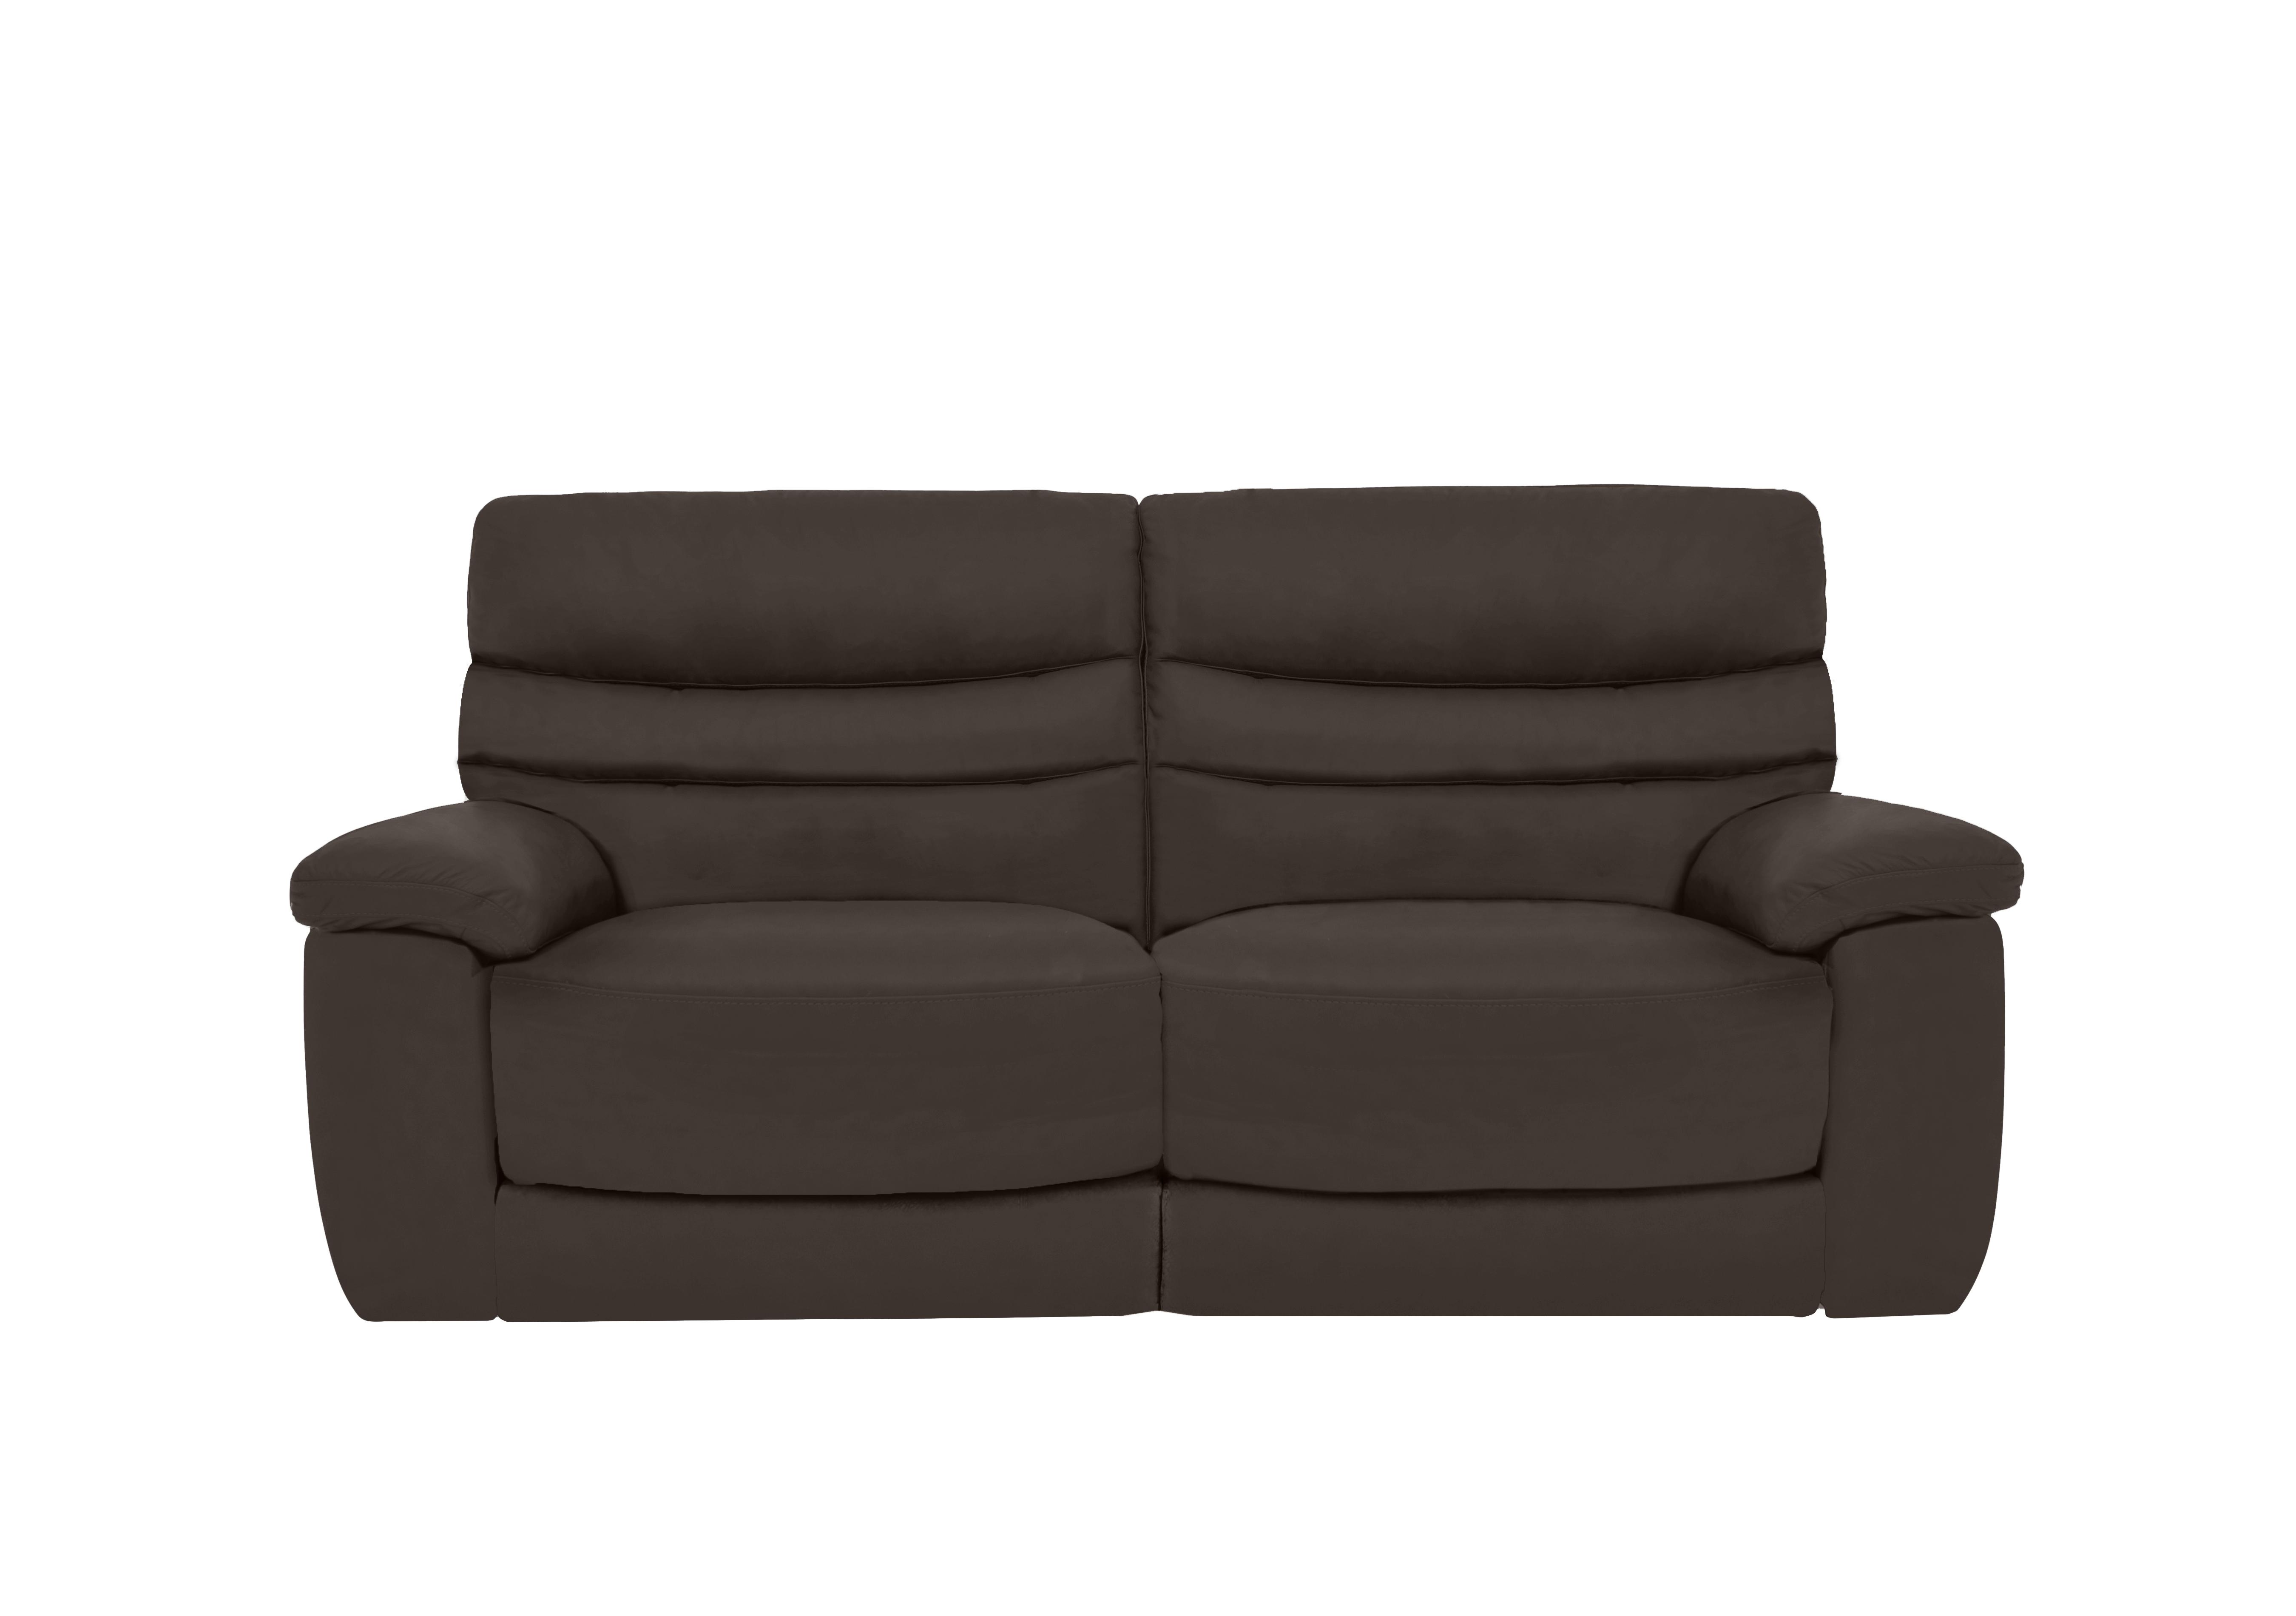 Nimbus 3 Seater Leather Power Recliner Sofa with Power Headrests in Bx-037c Walnut on Furniture Village